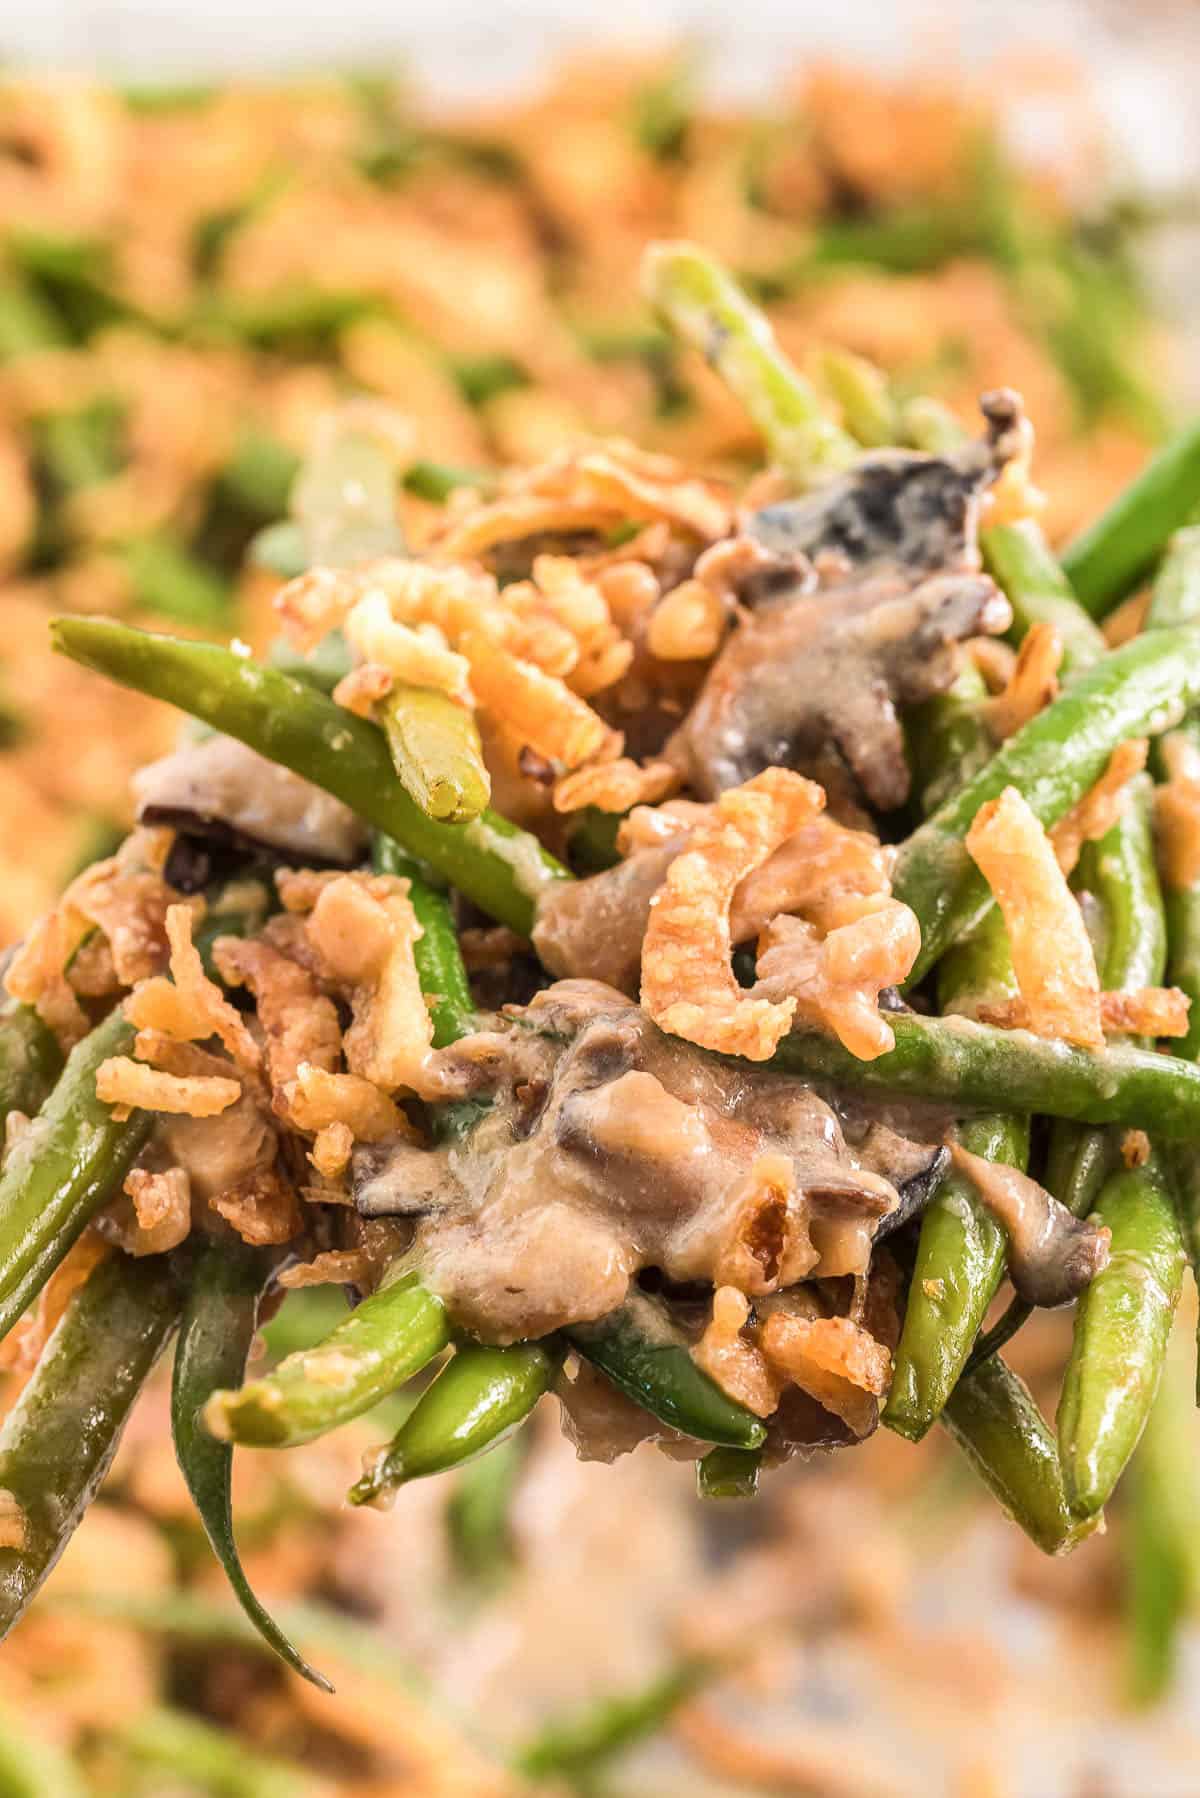 Scoop of homemade green bean casserole with crispy onion pieces.